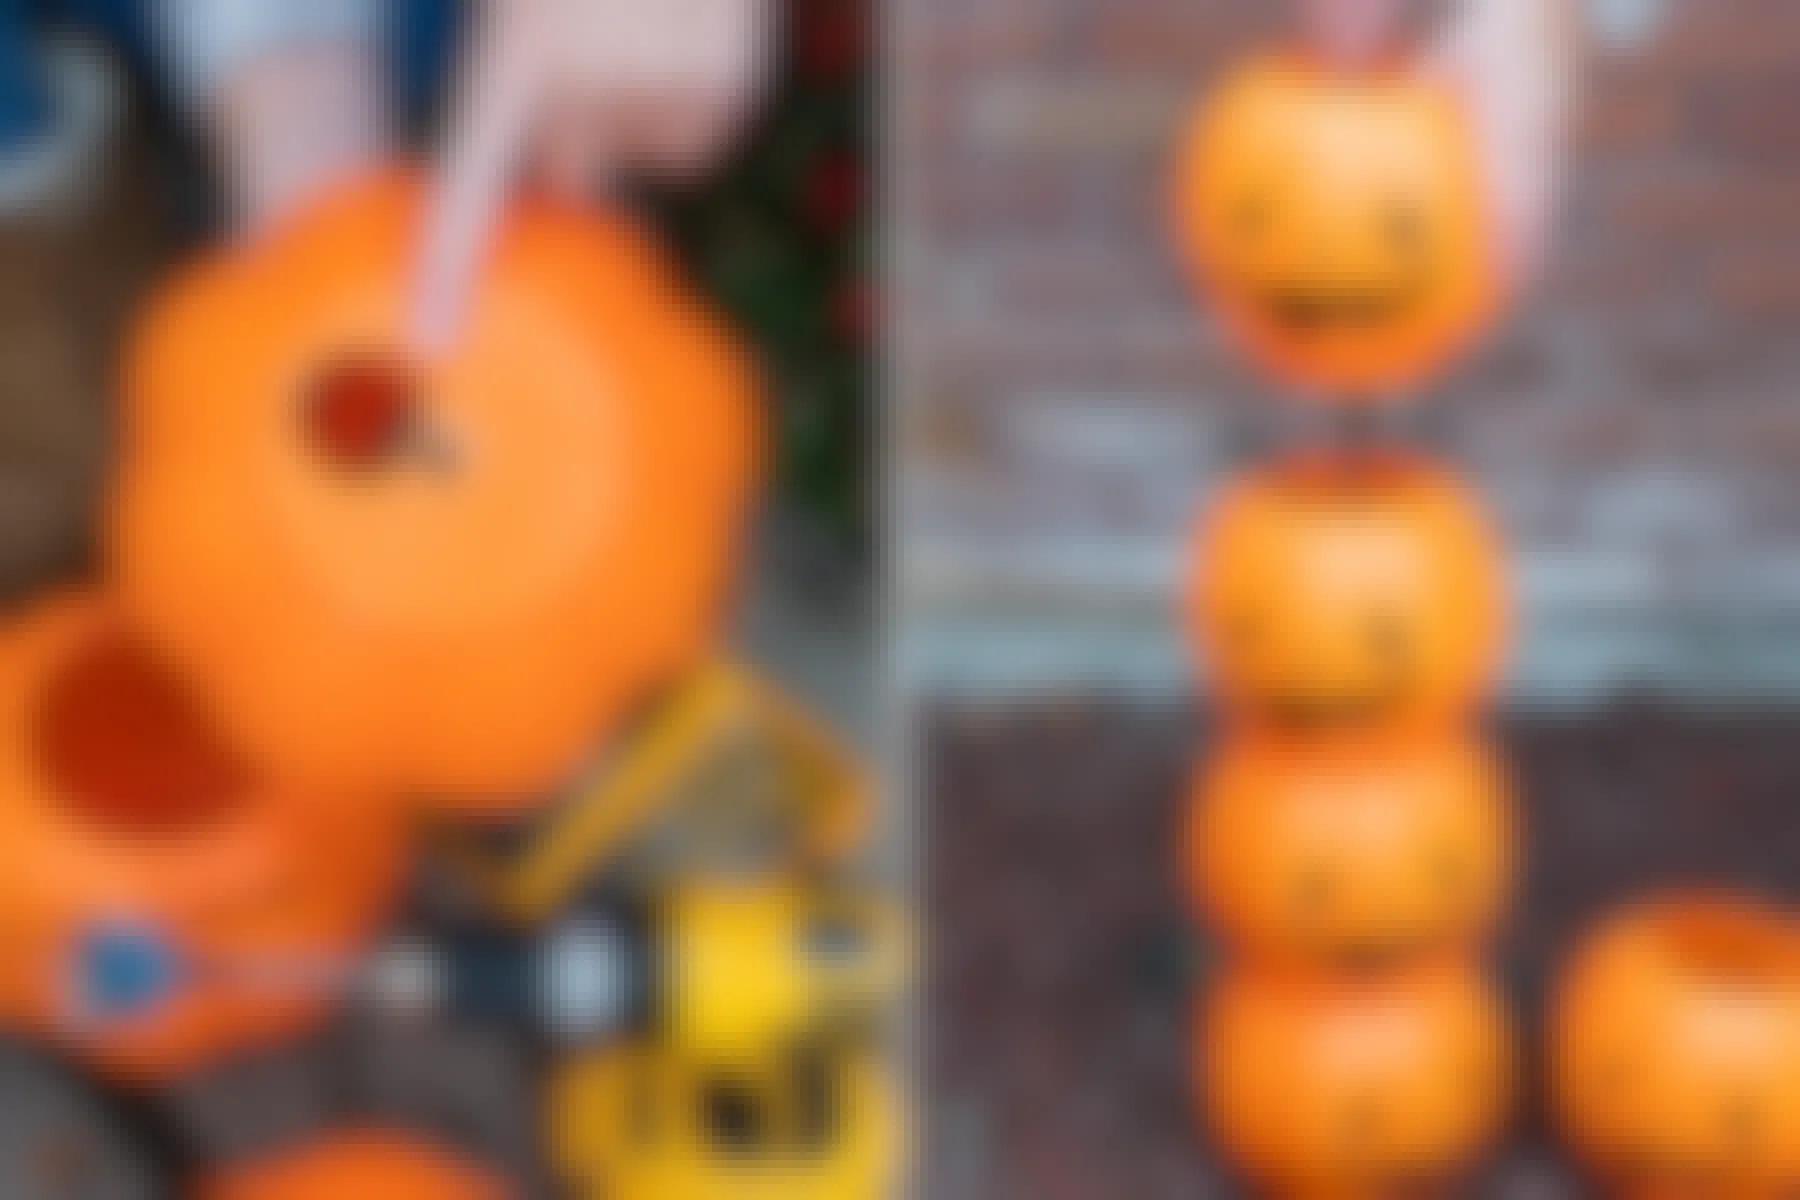 A person pointing to the holes drilled into the bottom of a plastic trick-or-treat pumpkin pail, and someone stacking multiple pails on a metal rod sticking out of the ground.